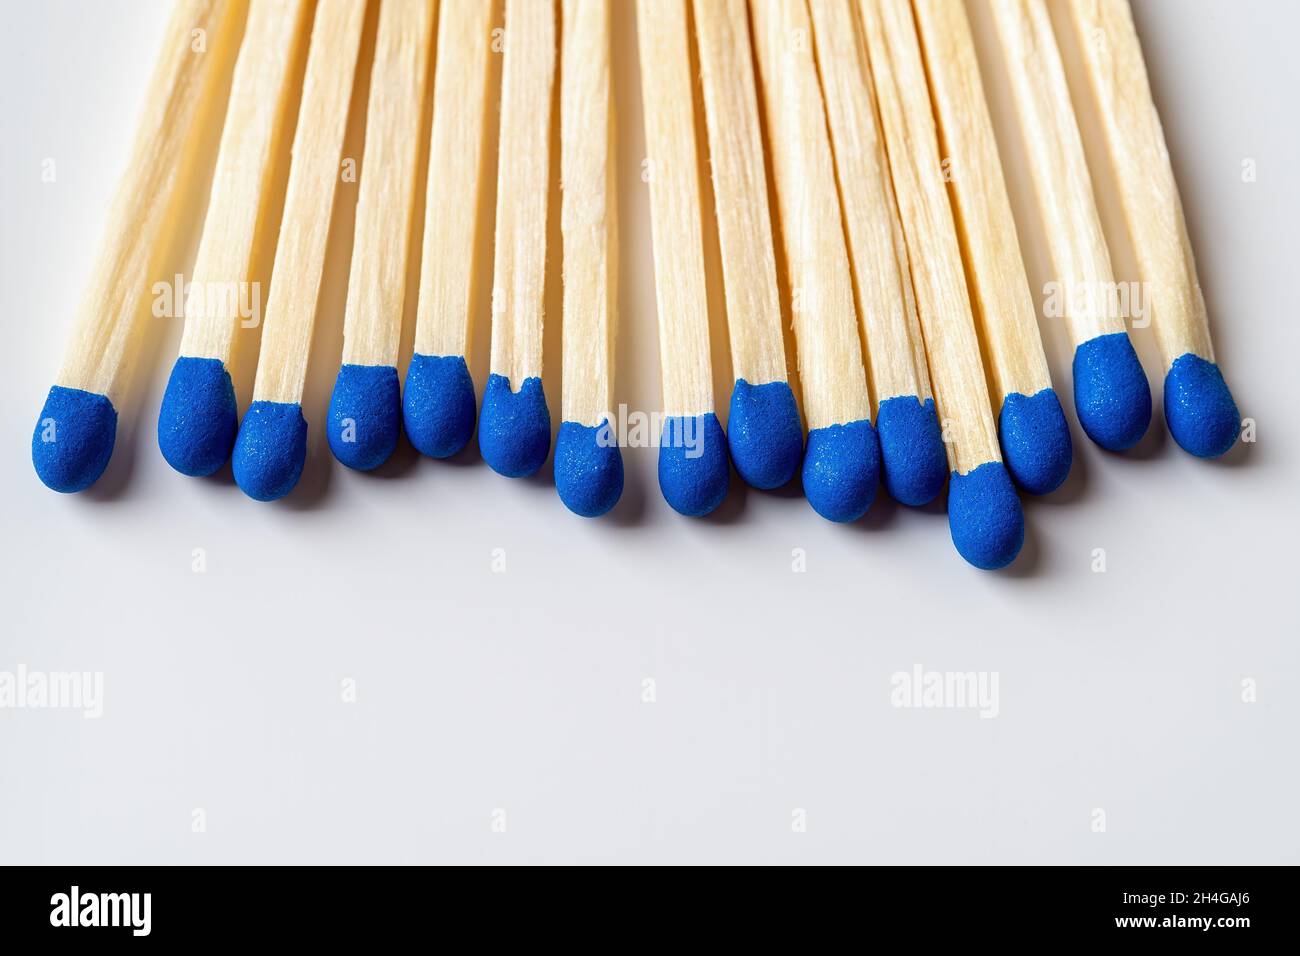 Bright blue wooden matches as a background with copy space. Row of matchsticks with blue heads over light gray surface. Several wooden matches. Stock Photo